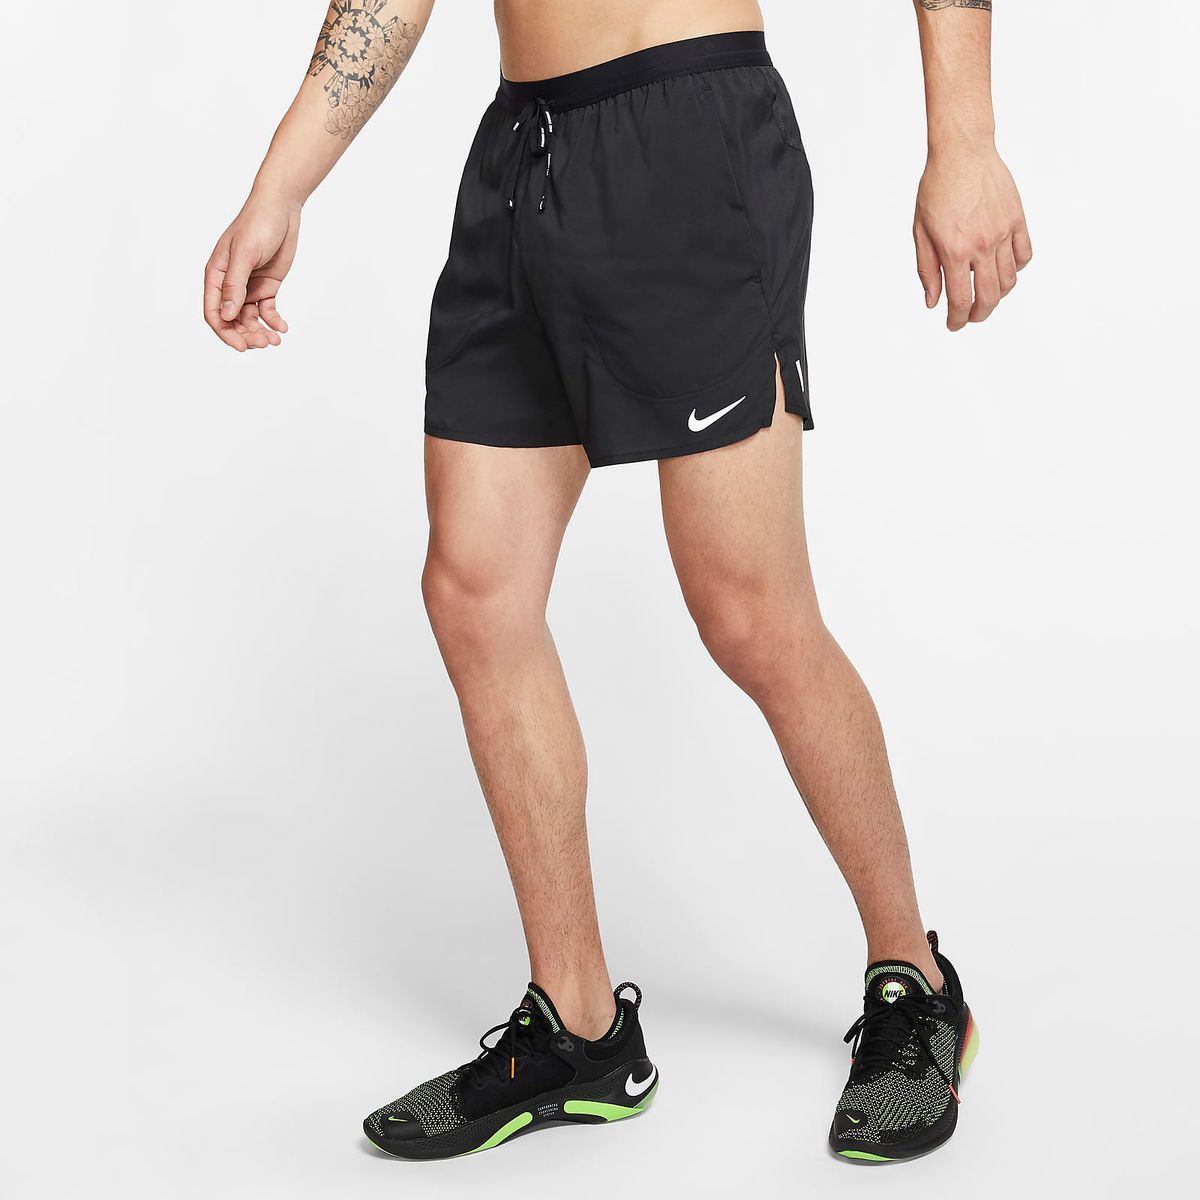 21 Best Gym Shorts for Men 2020 | The 